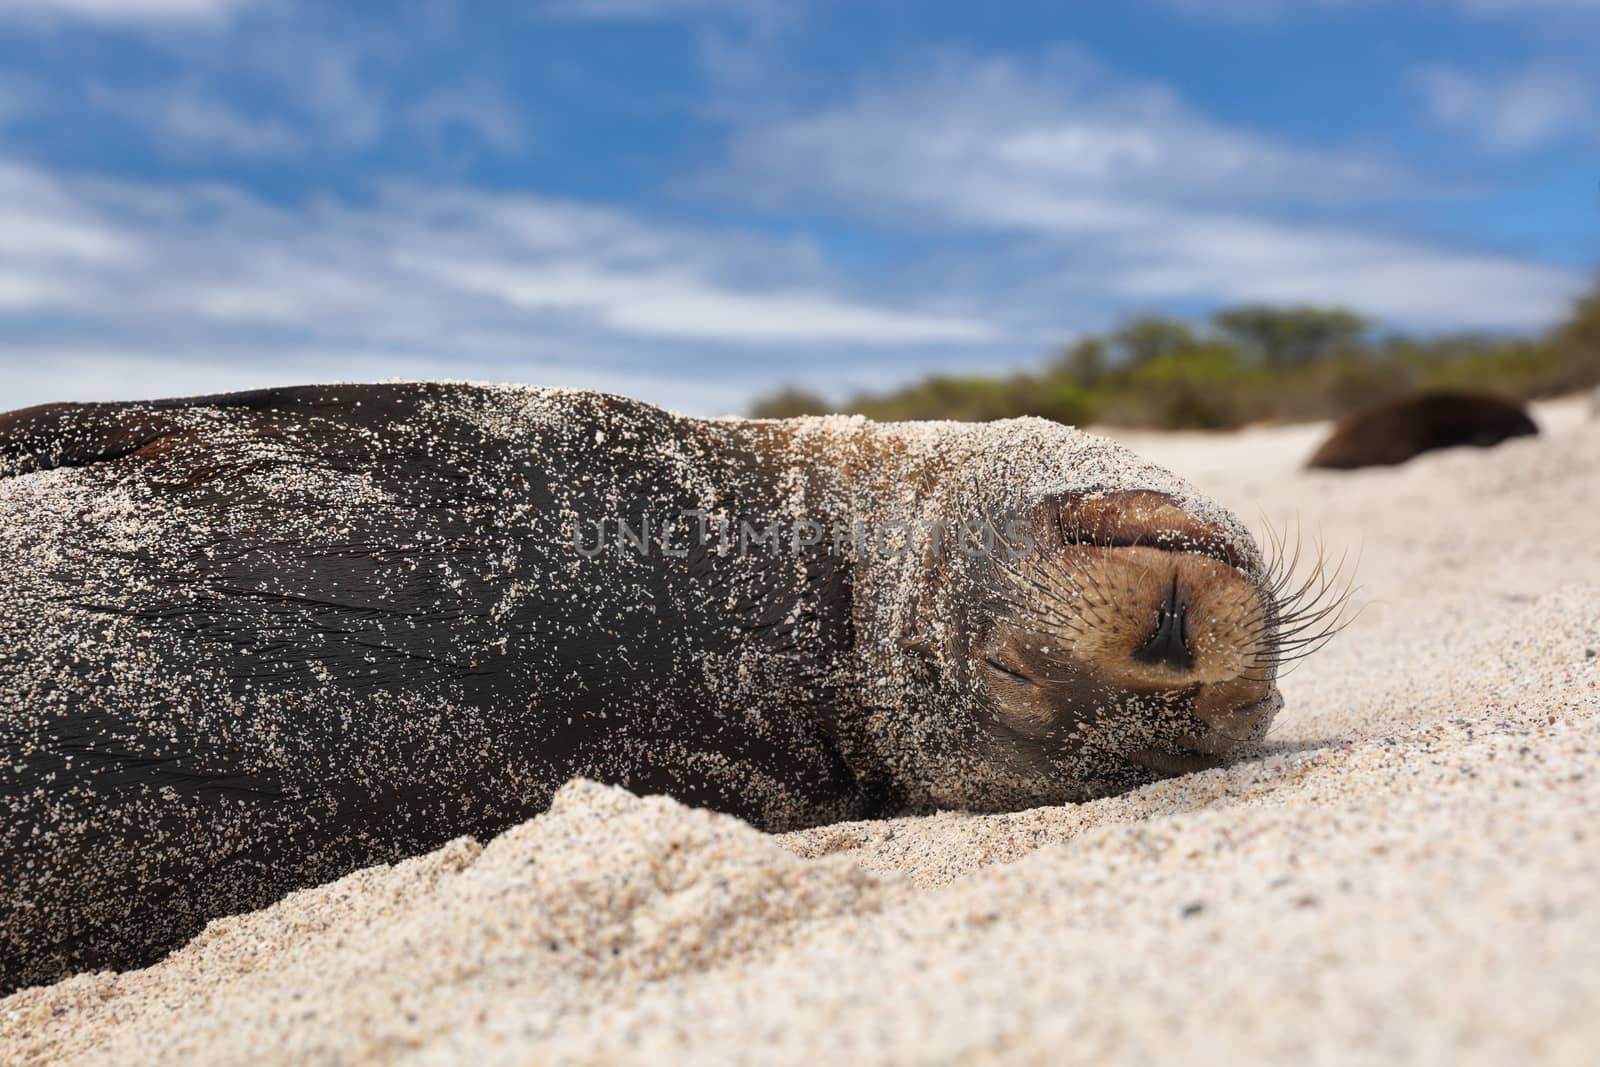 Galapagos Sea Lion in sand lying on beach. Wildlife in nature, animals in natural habitat.